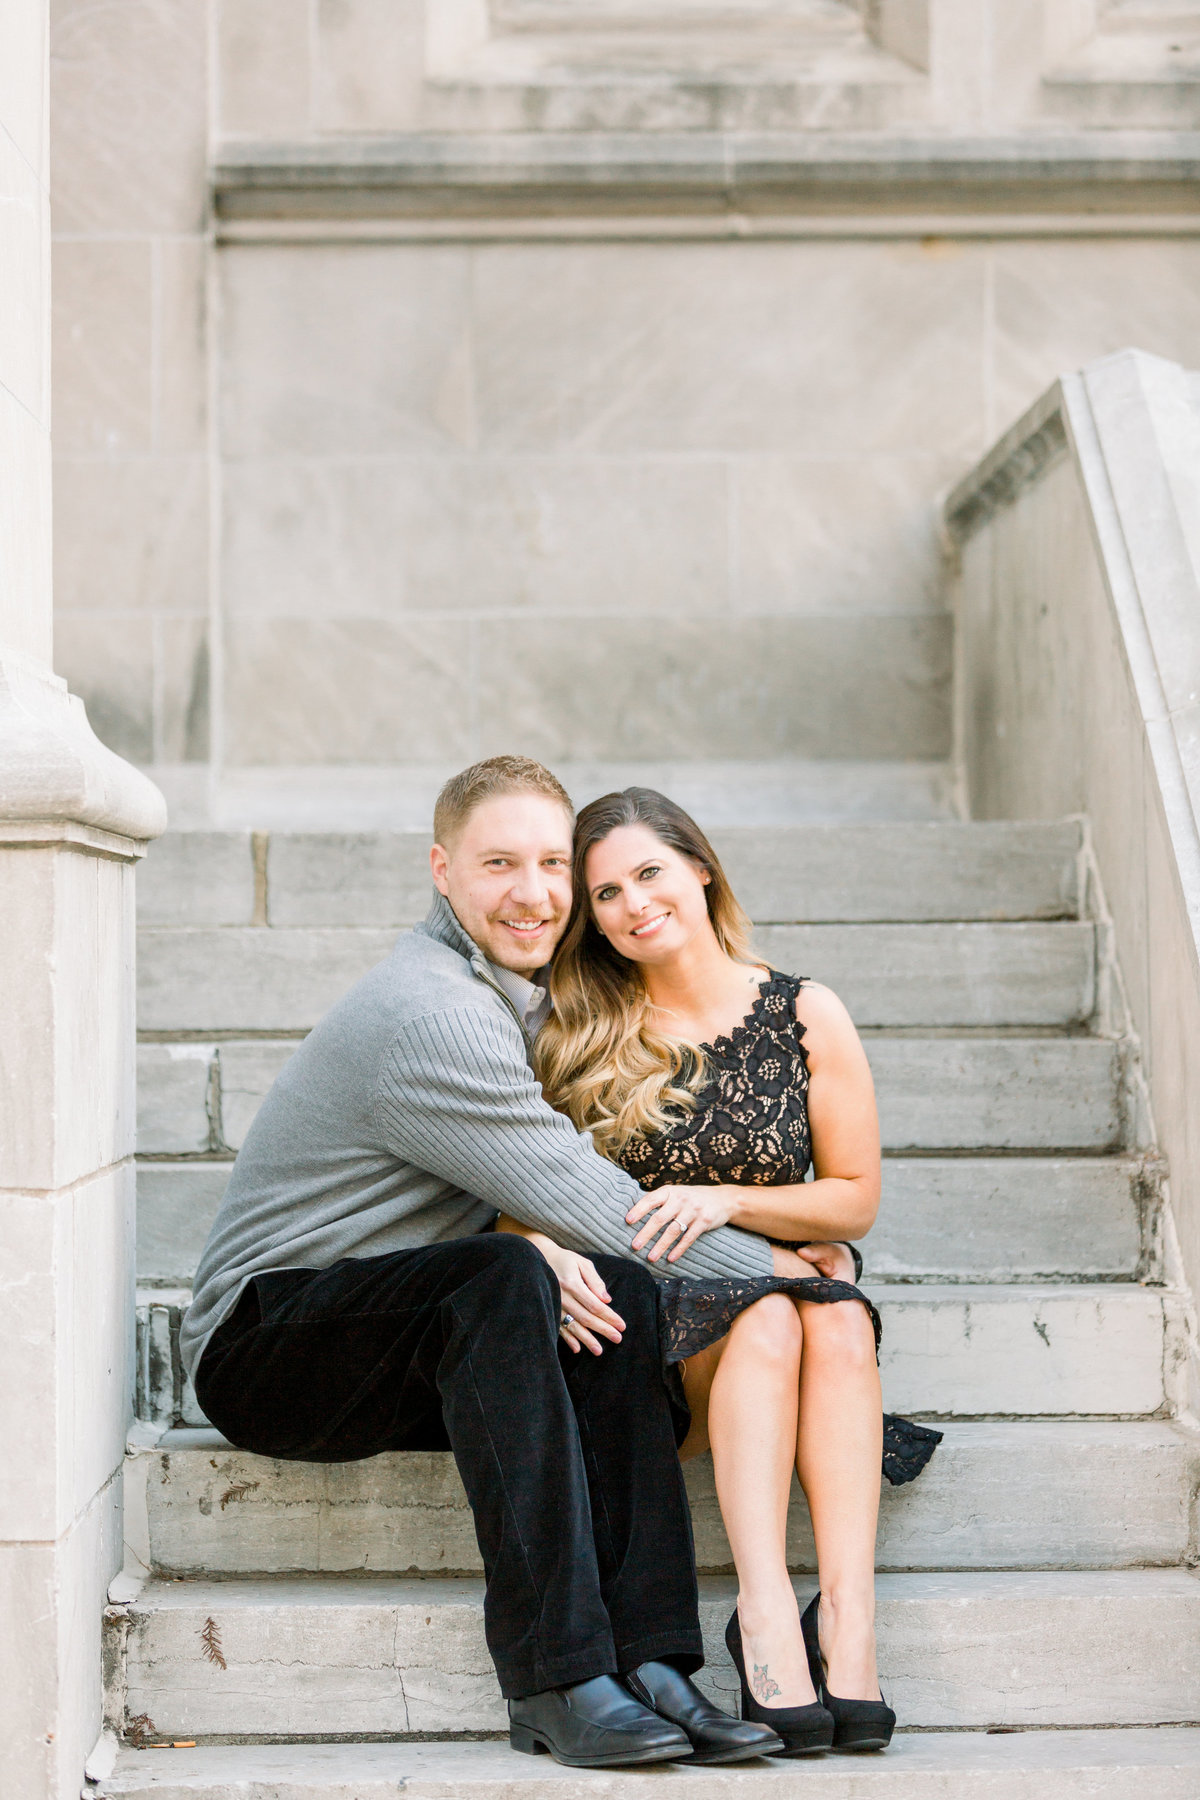 Galleries-Nathan and Jaime Engagement Session-0010